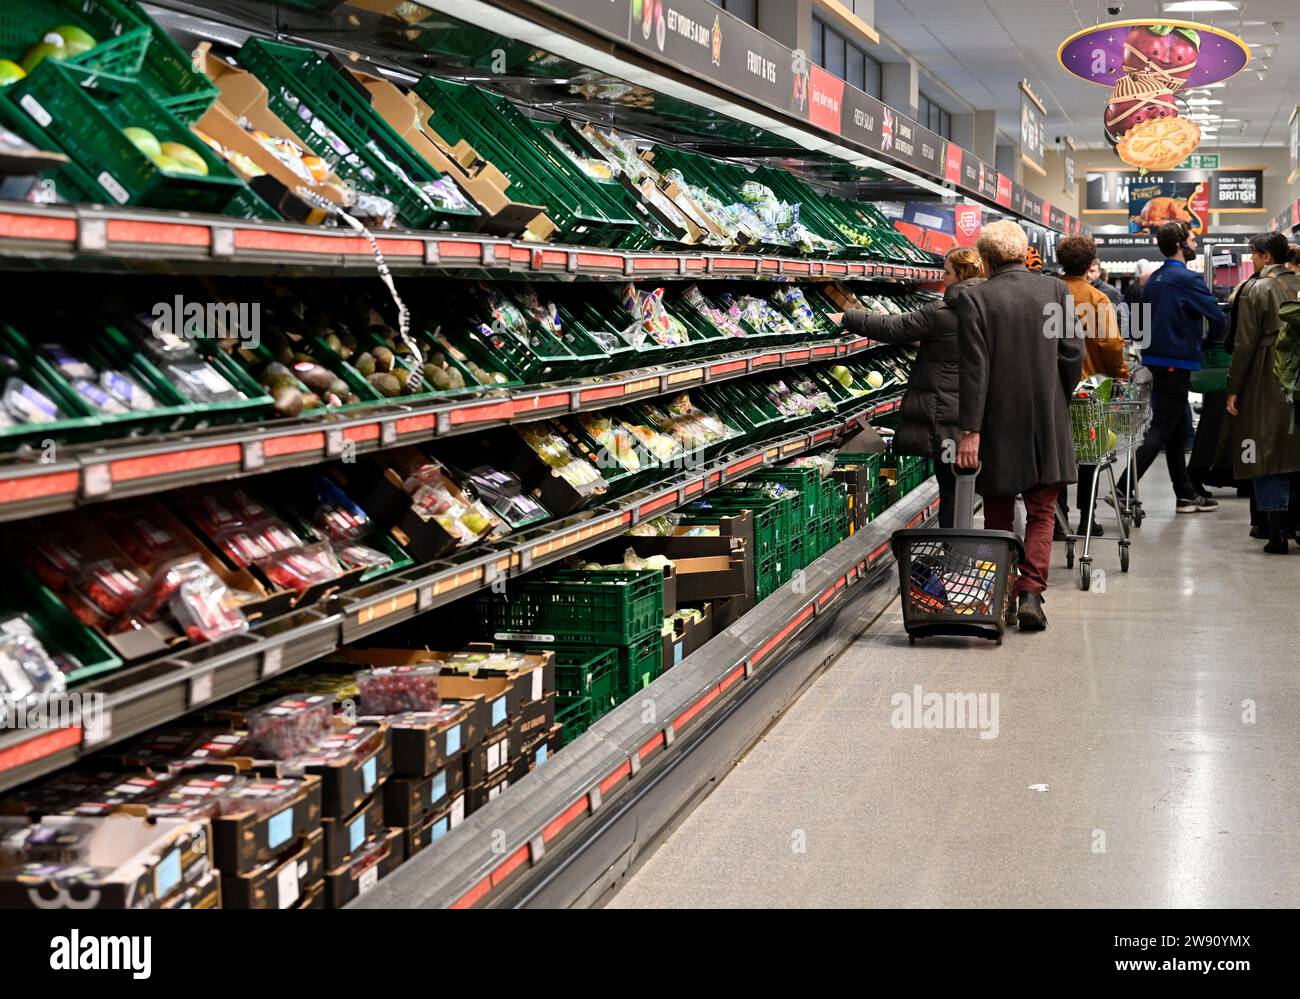 Supermarket vegetables aisle with shoppers Stock Photo